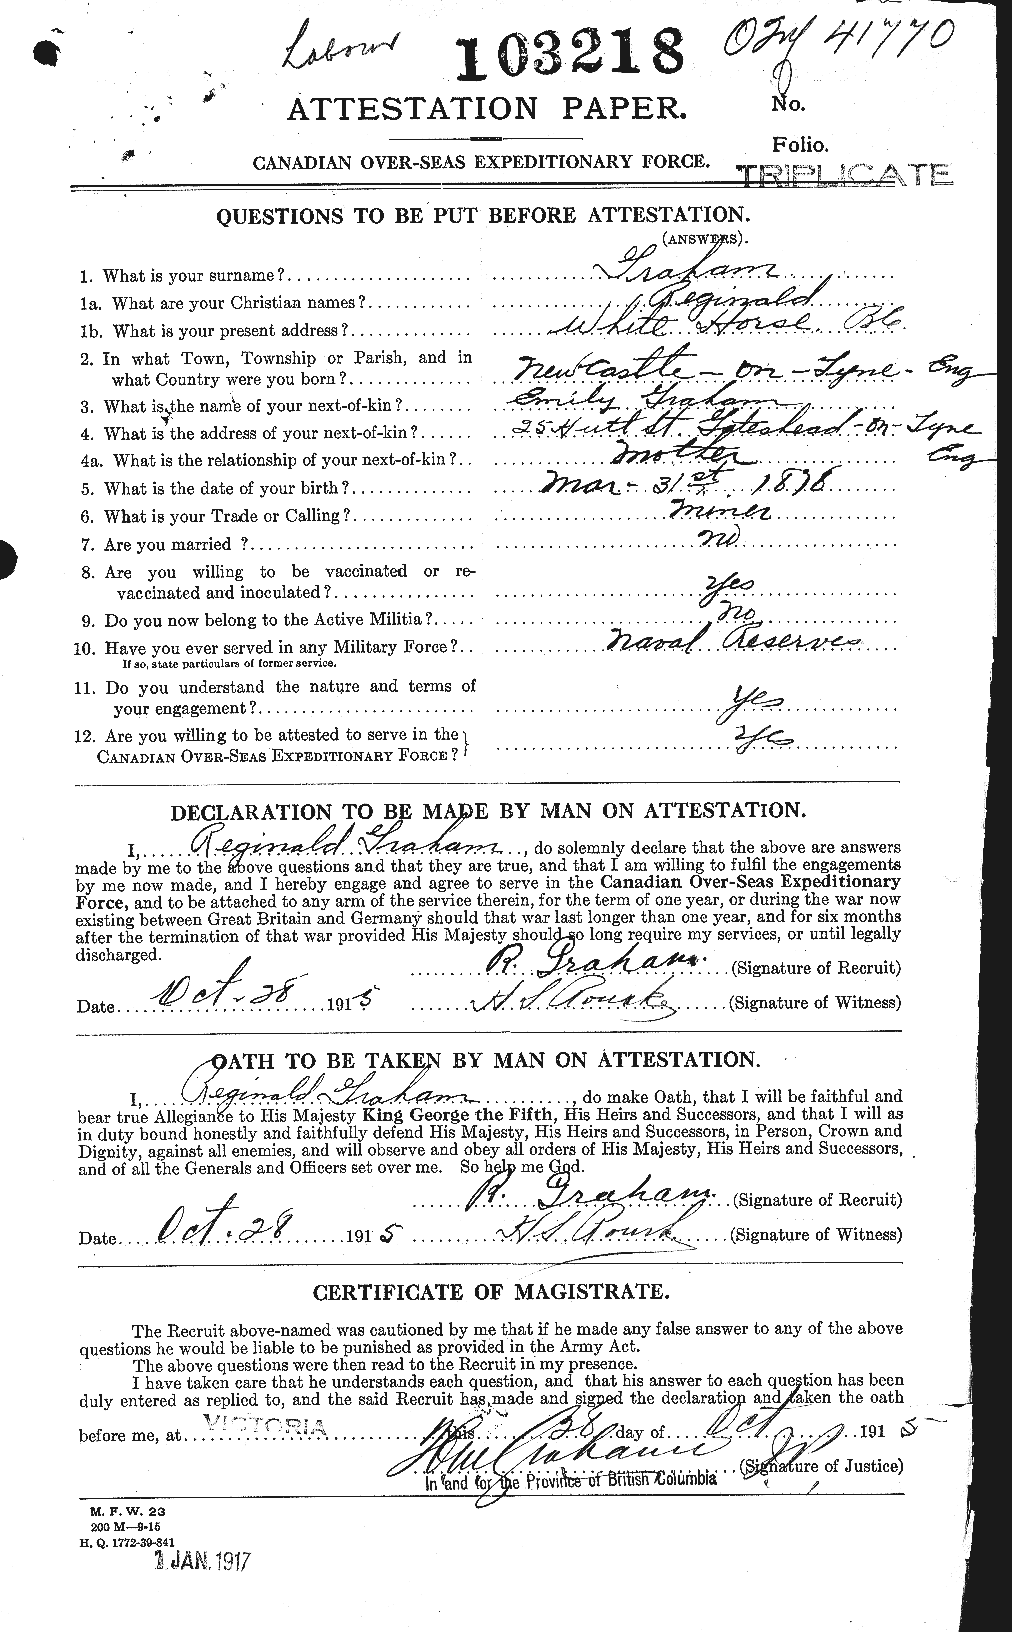 Personnel Records of the First World War - CEF 691145a